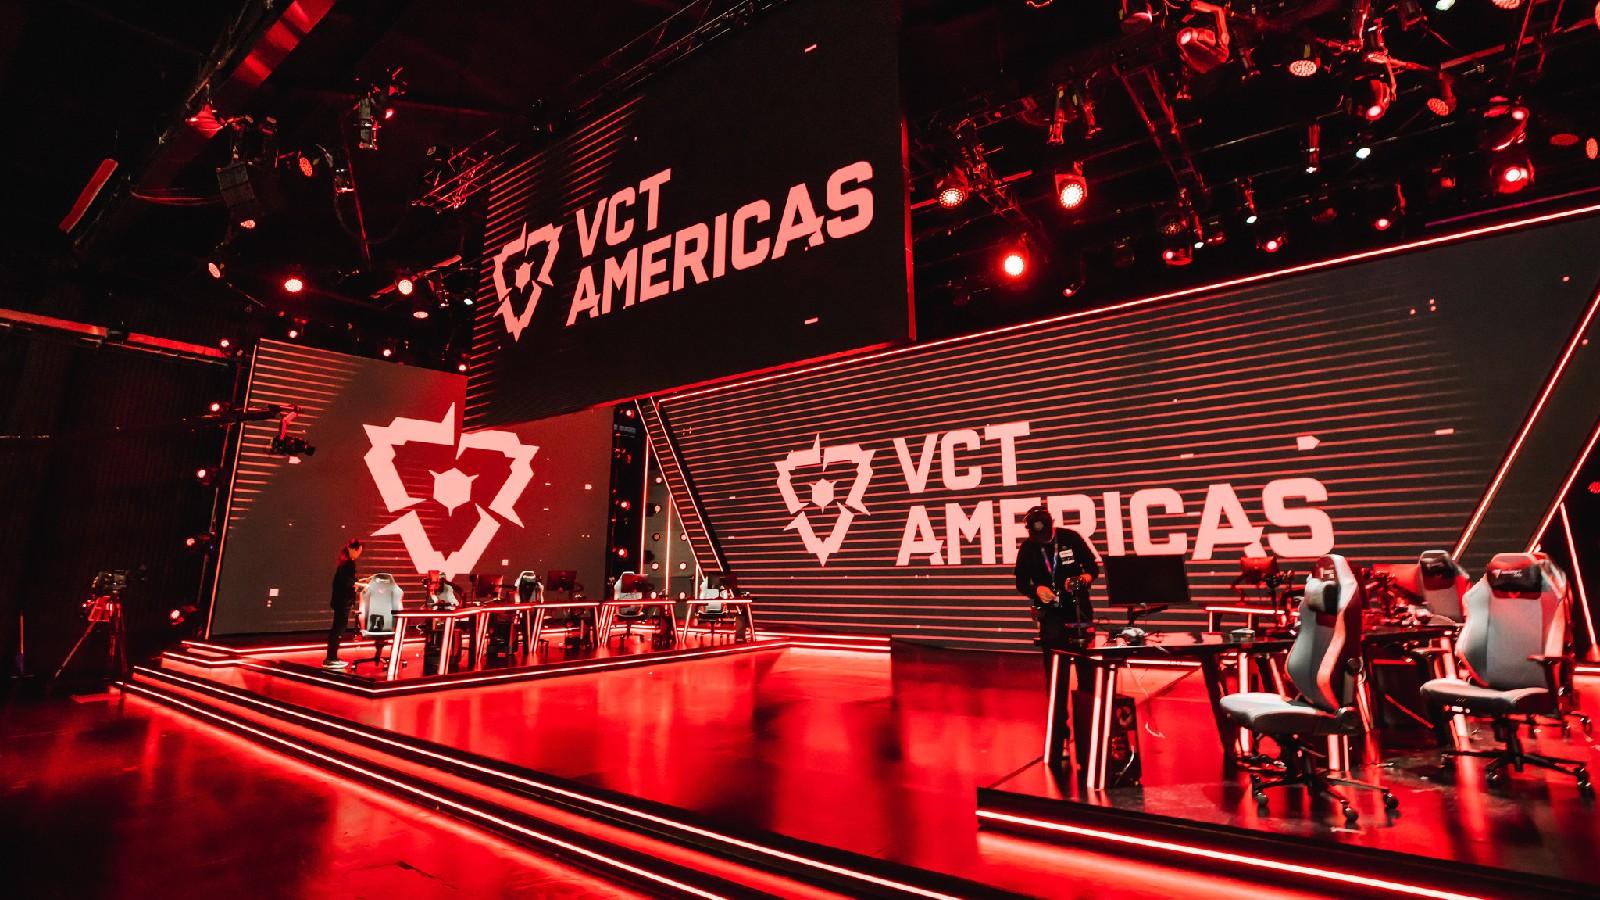 The Guard won’t participate in 2024 VCT Americas after failing to meet